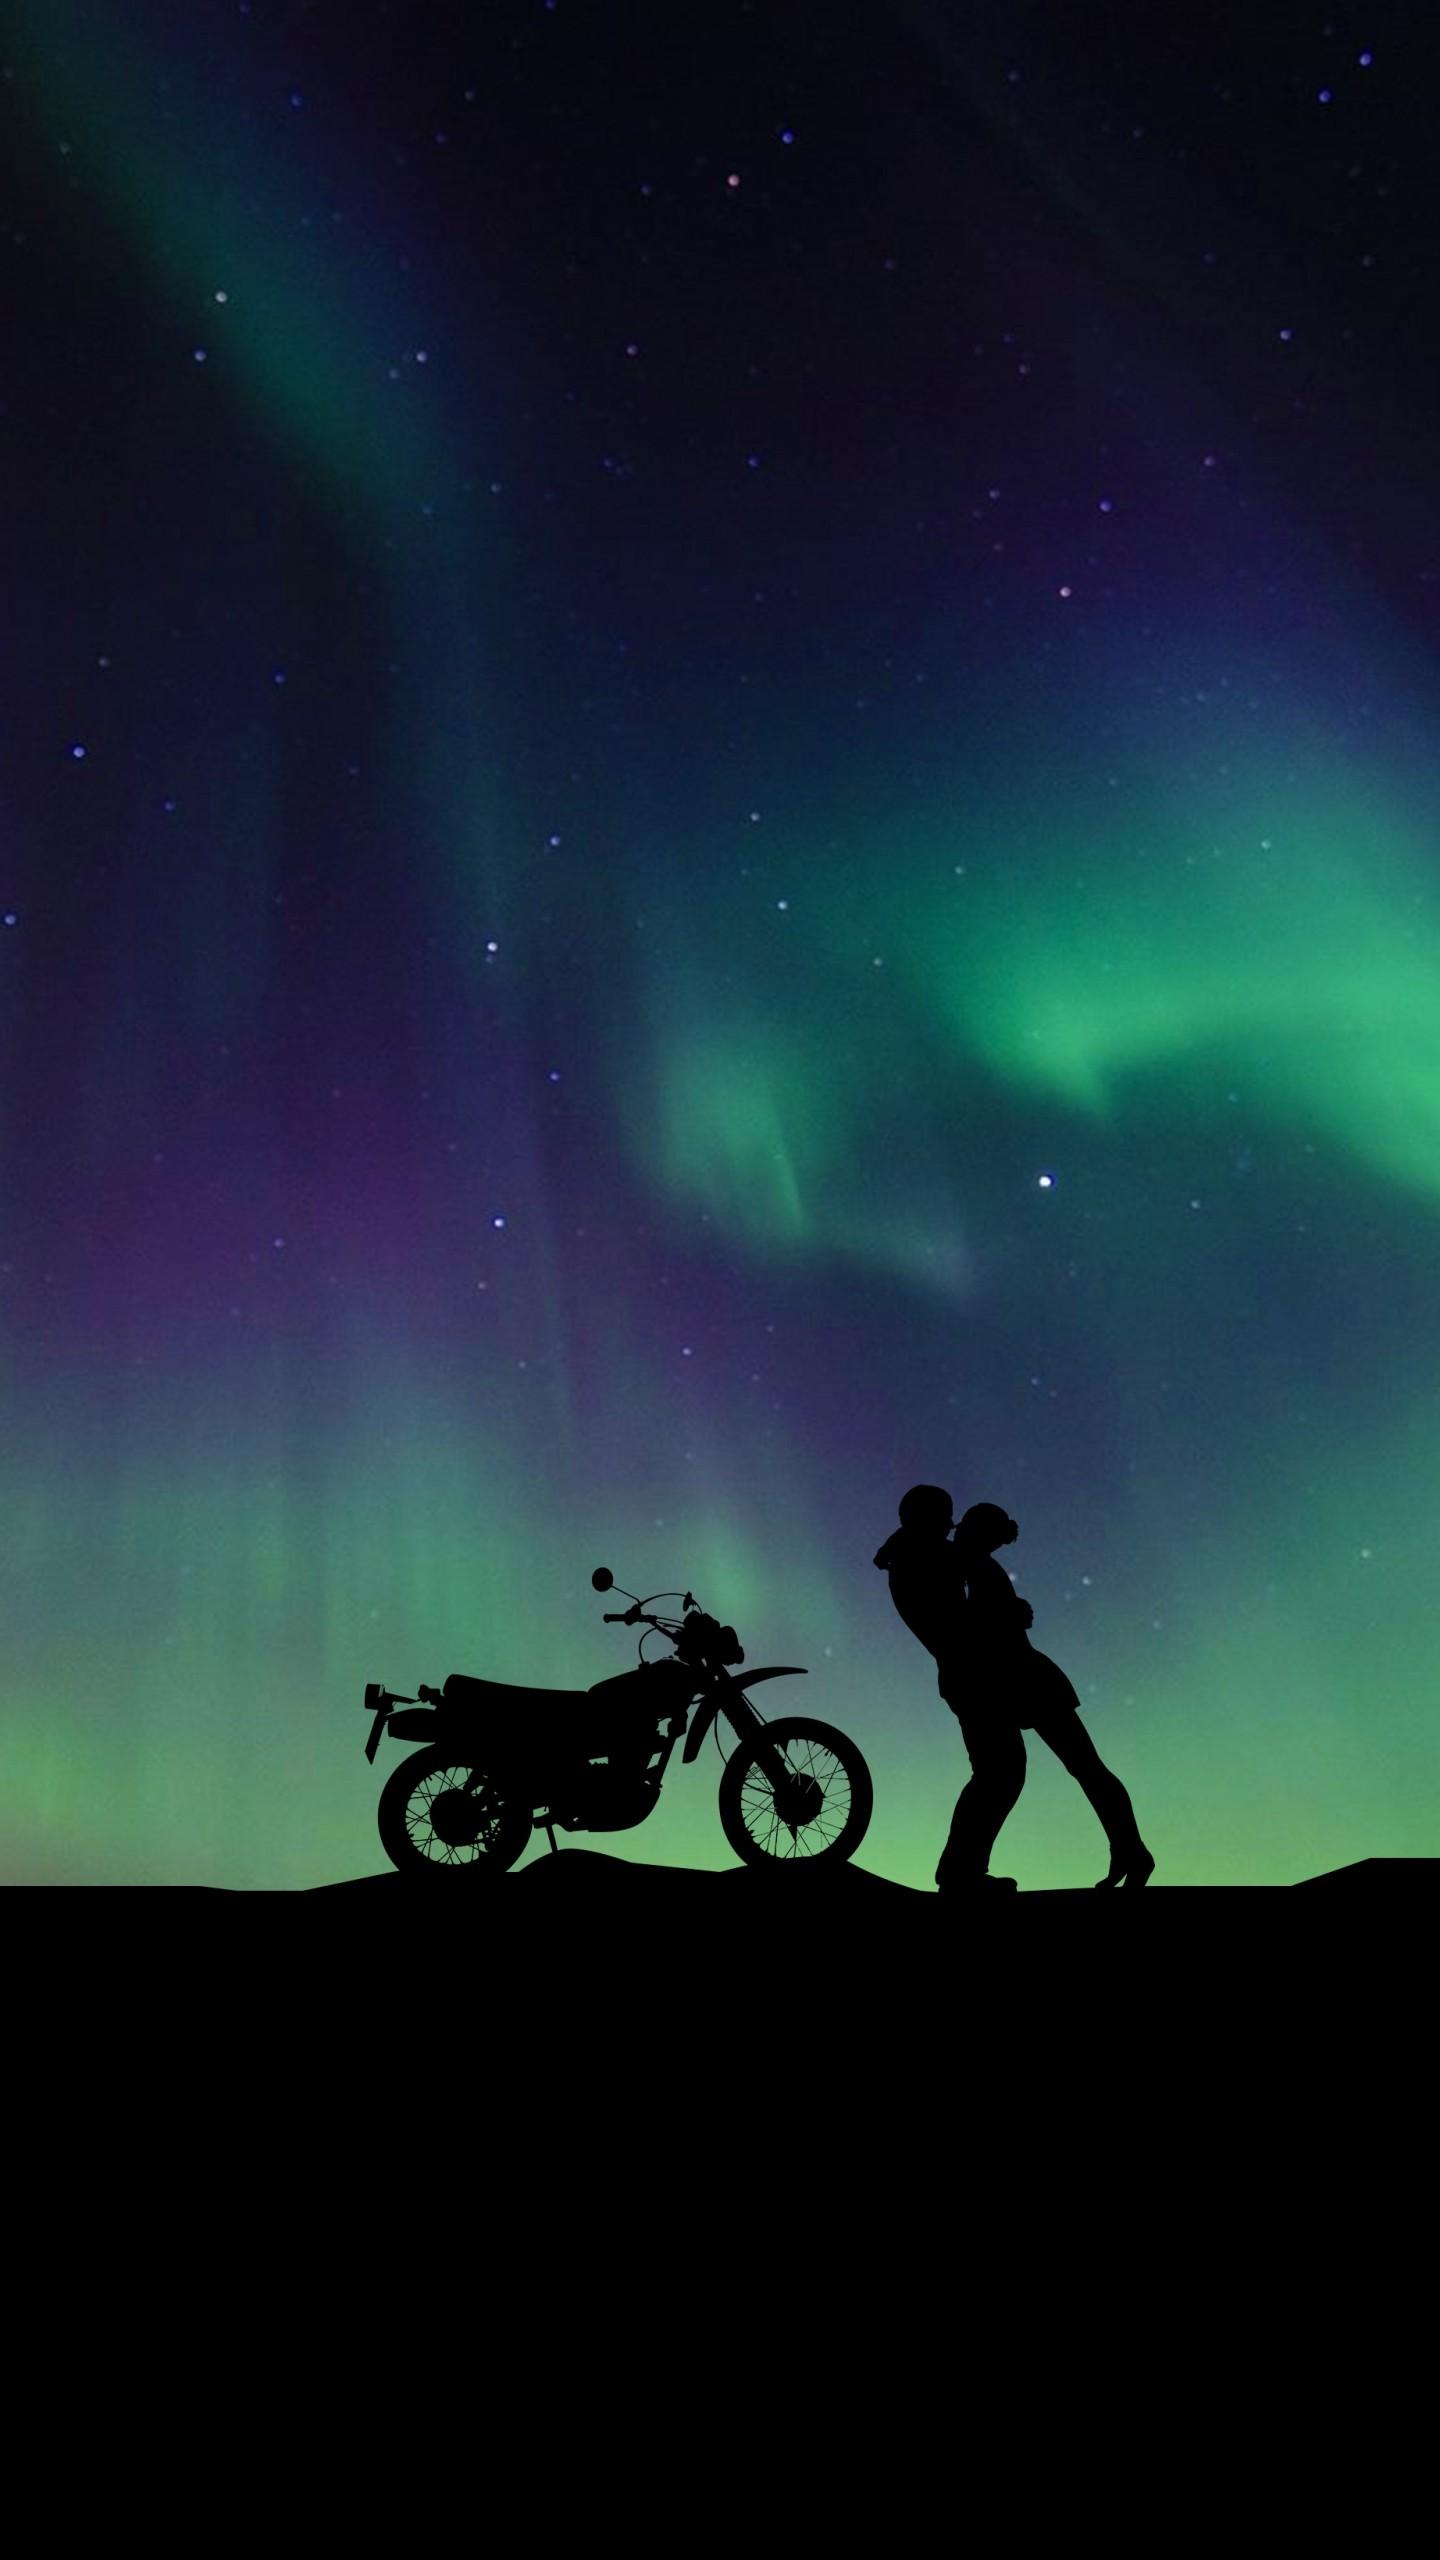 Wallpaper Couple, Aurora Borealis, Northern Lights, Motorcycle, Girl friend, Love,. Wallpaper for iPhone, Android, Mobile and Desktop